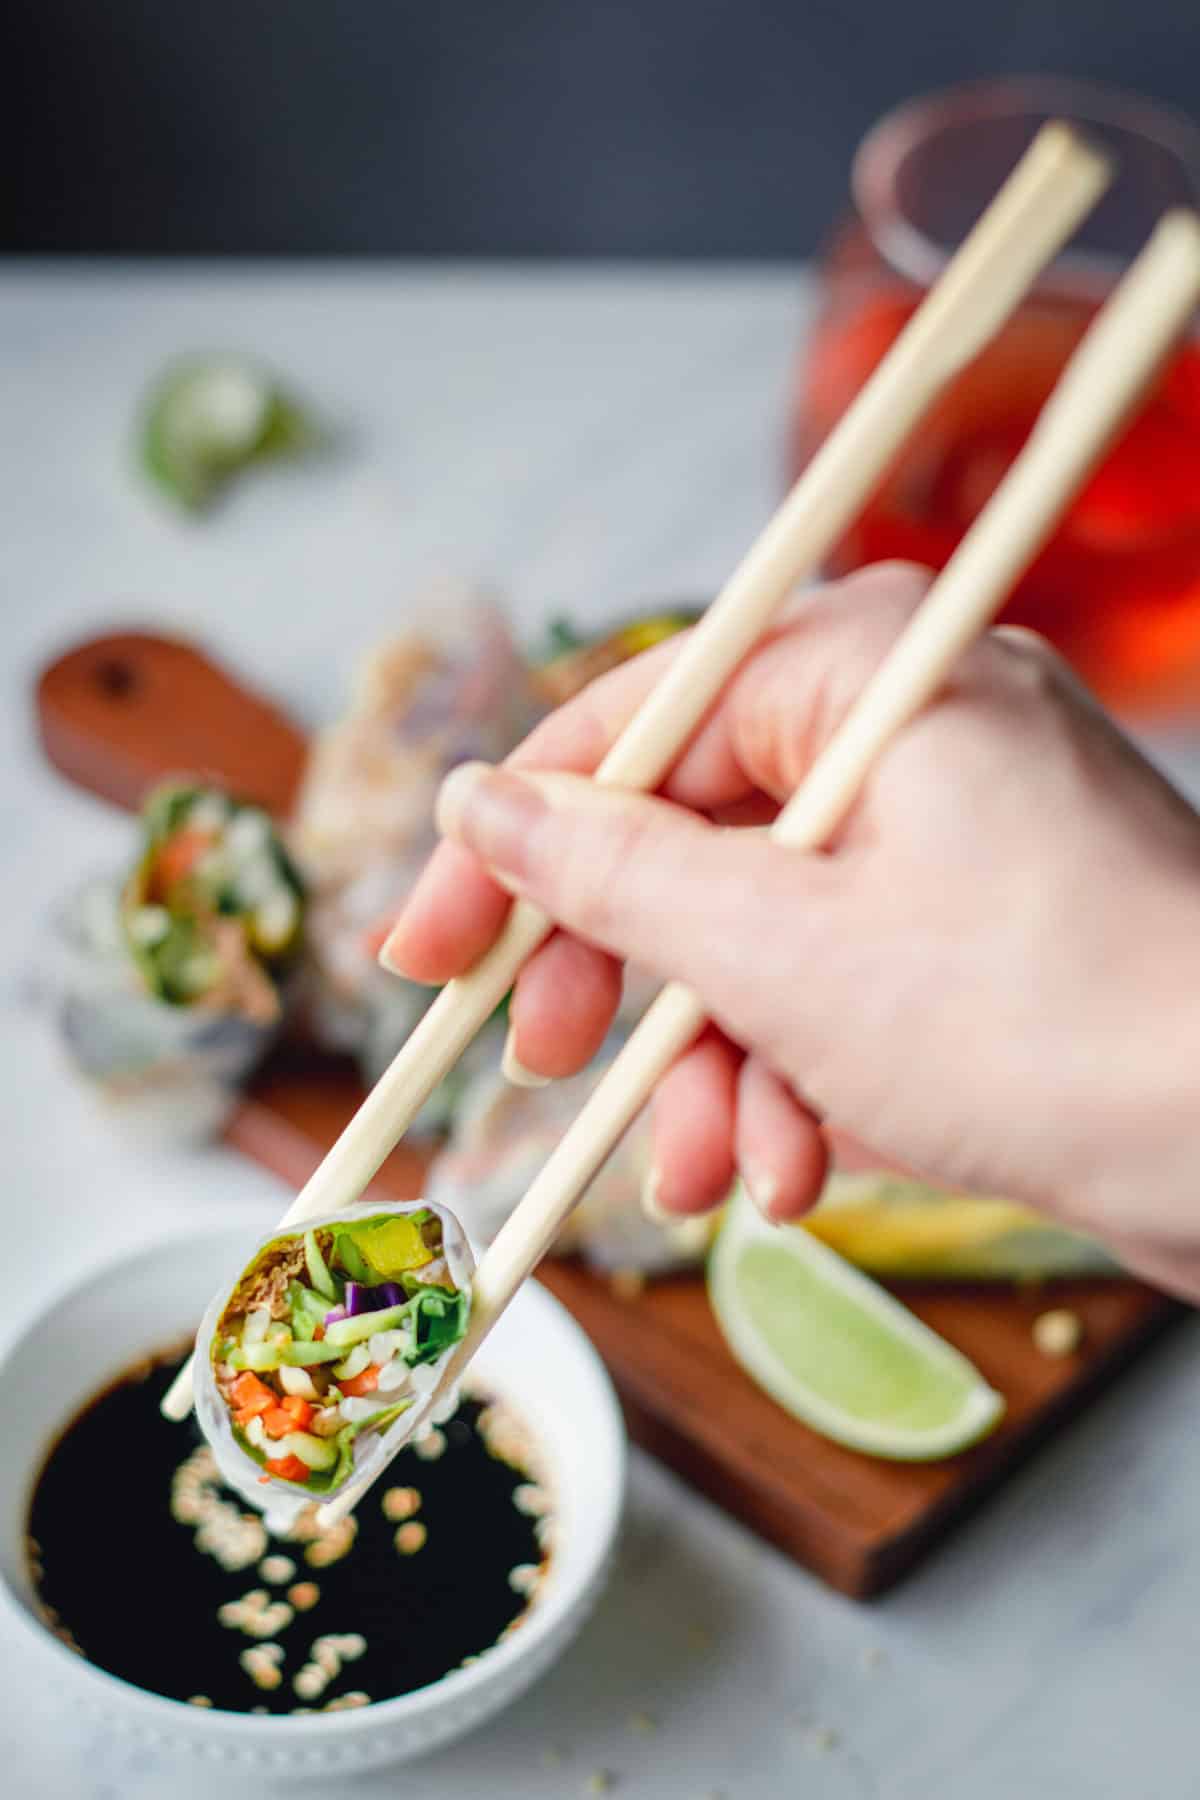 using chopsticks to dip spring roll in soy sauce